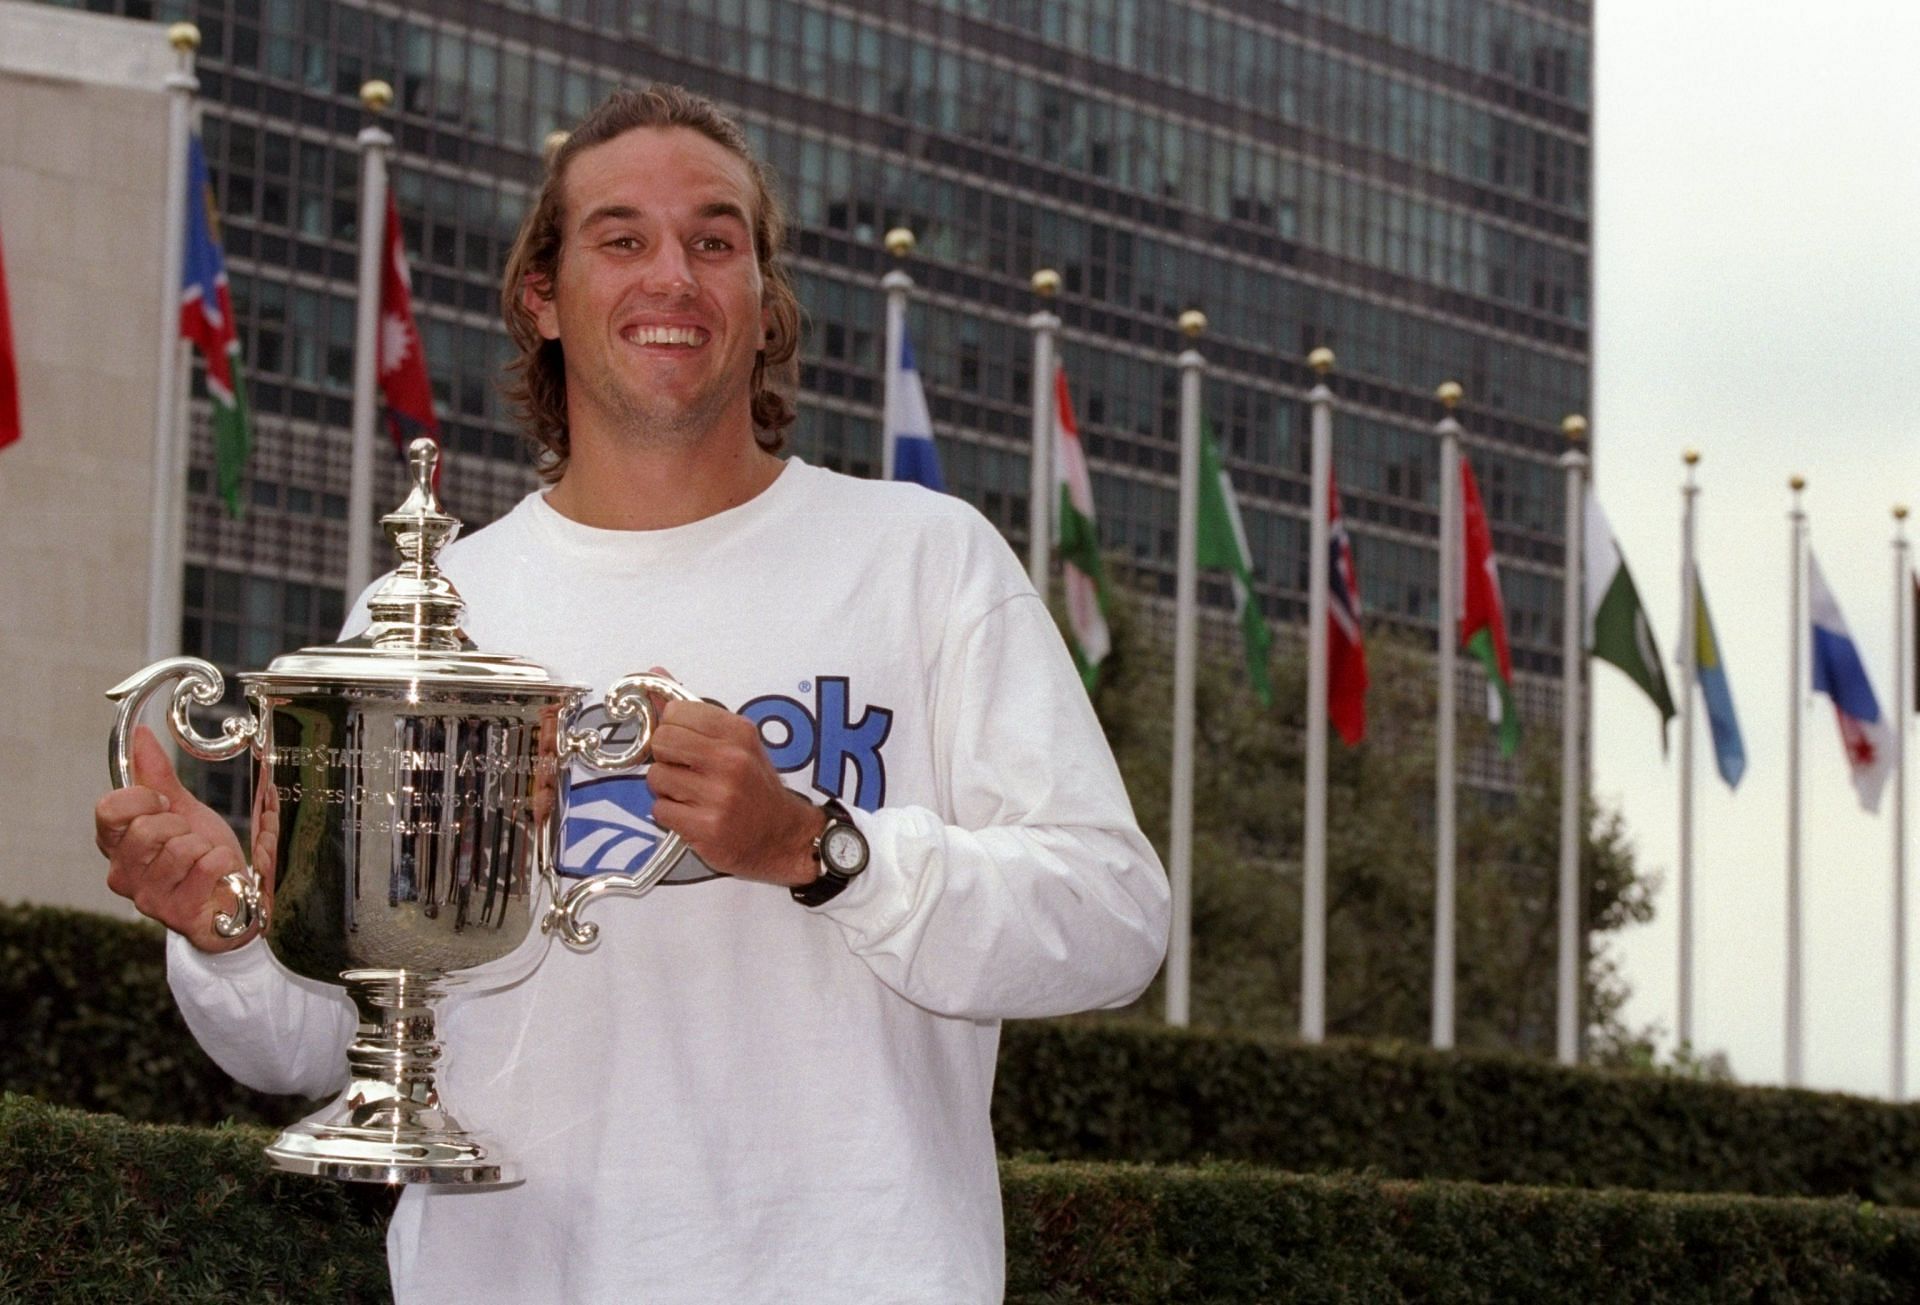 Patrick Rafter won the 1997 US Open.